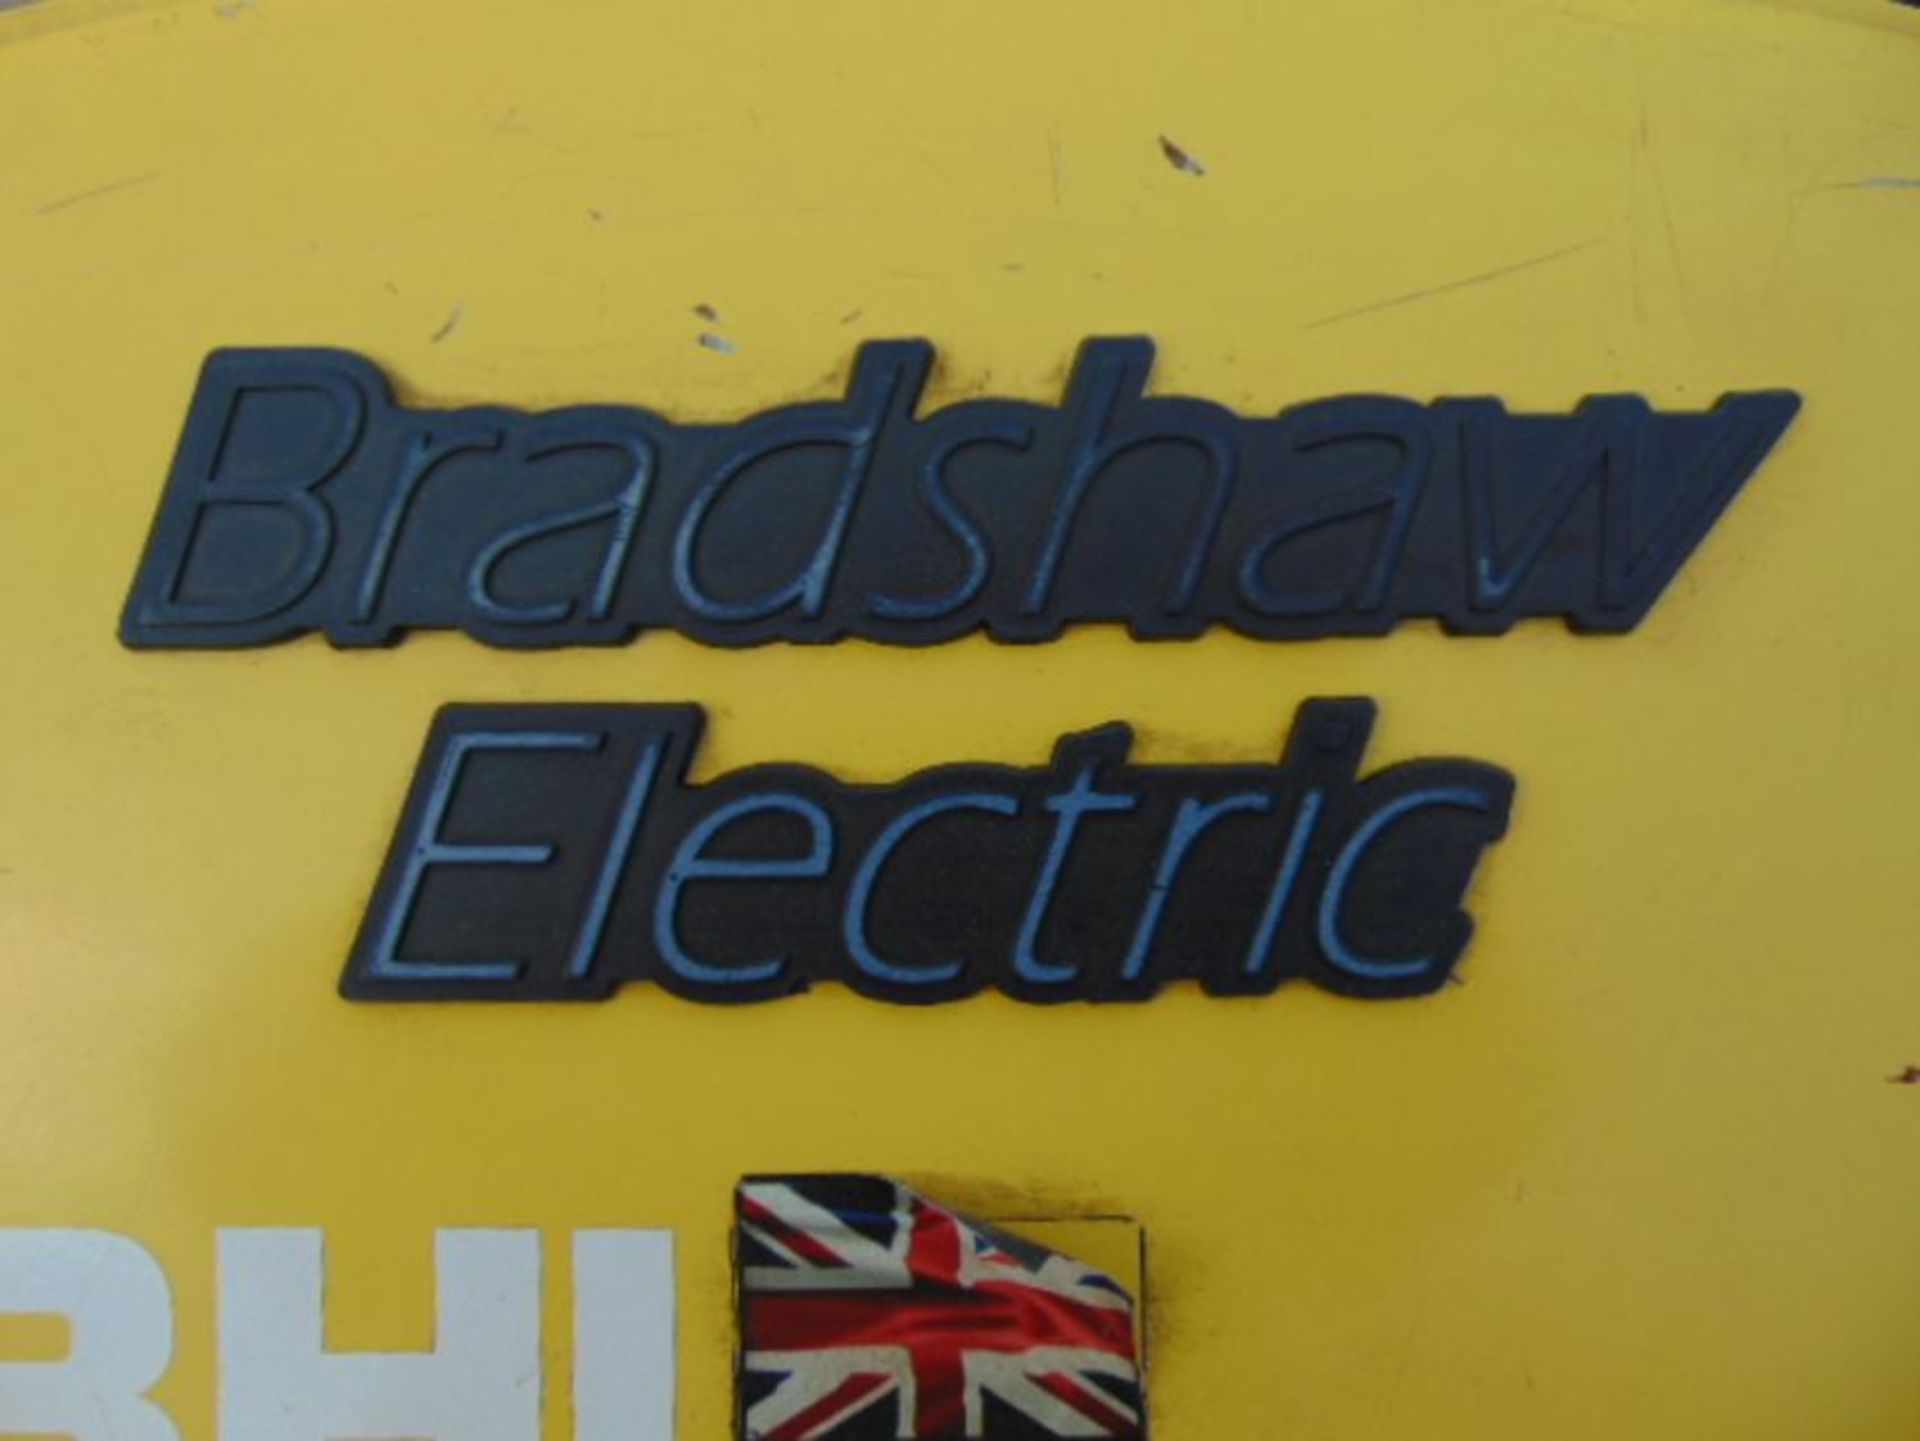 2010 Bradshaw T5 5000Kg Electric Tow Tractor c/w Battery Charger. - Image 13 of 13